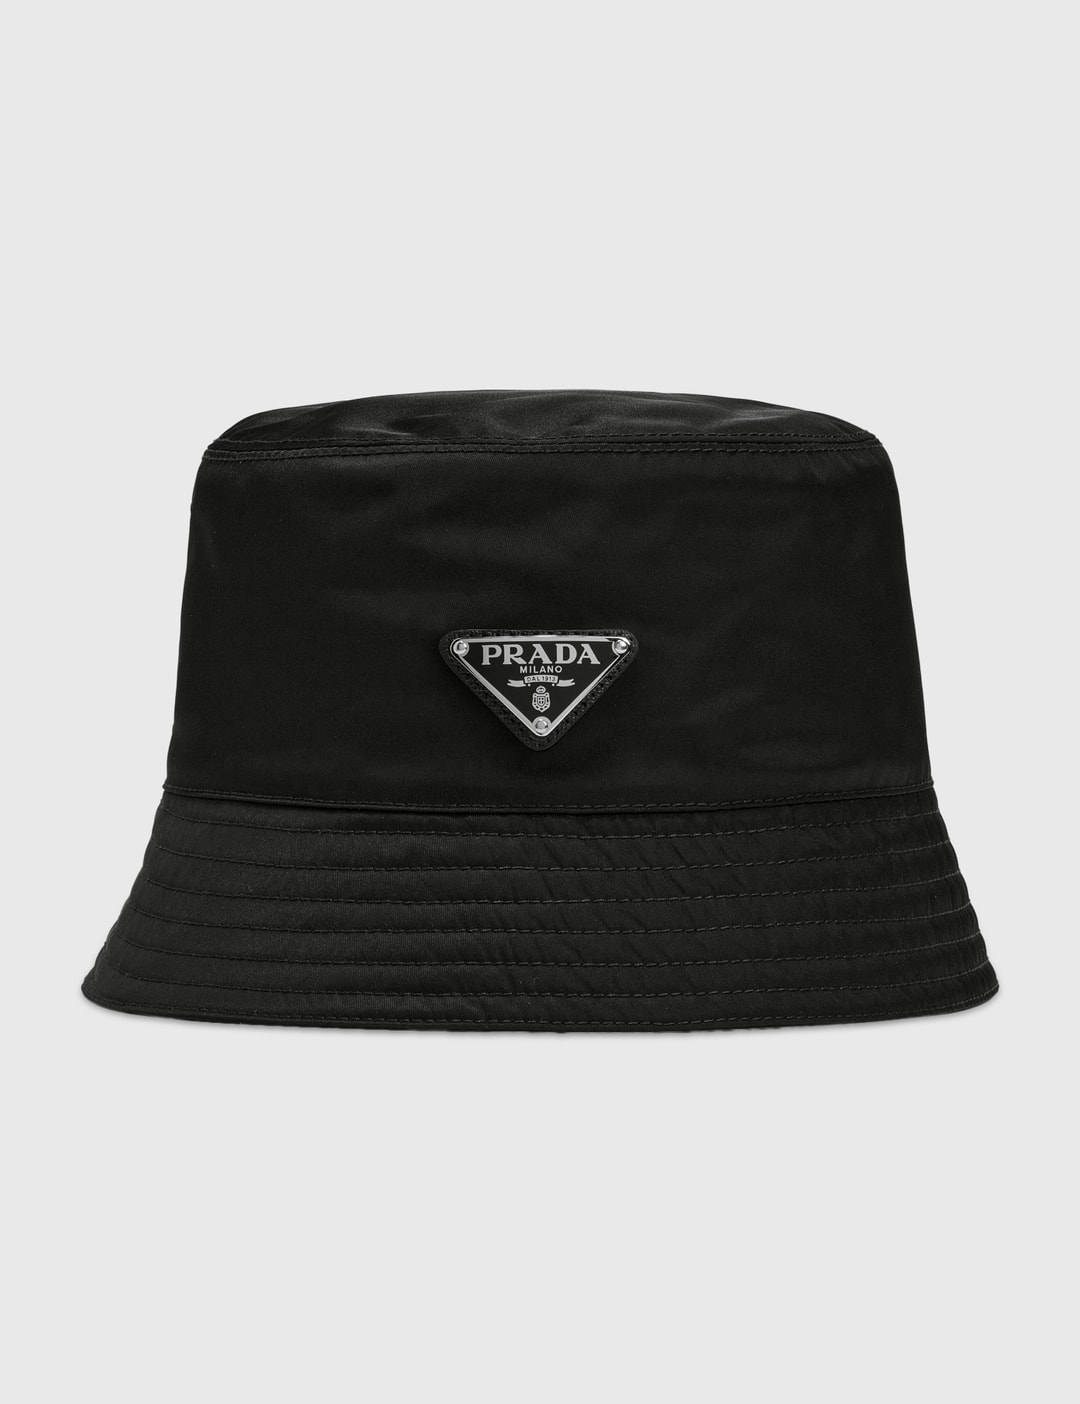 Prada - Re-nylon Bucket Hat | HBX - Globally Curated Fashion and Lifestyle  by Hypebeast